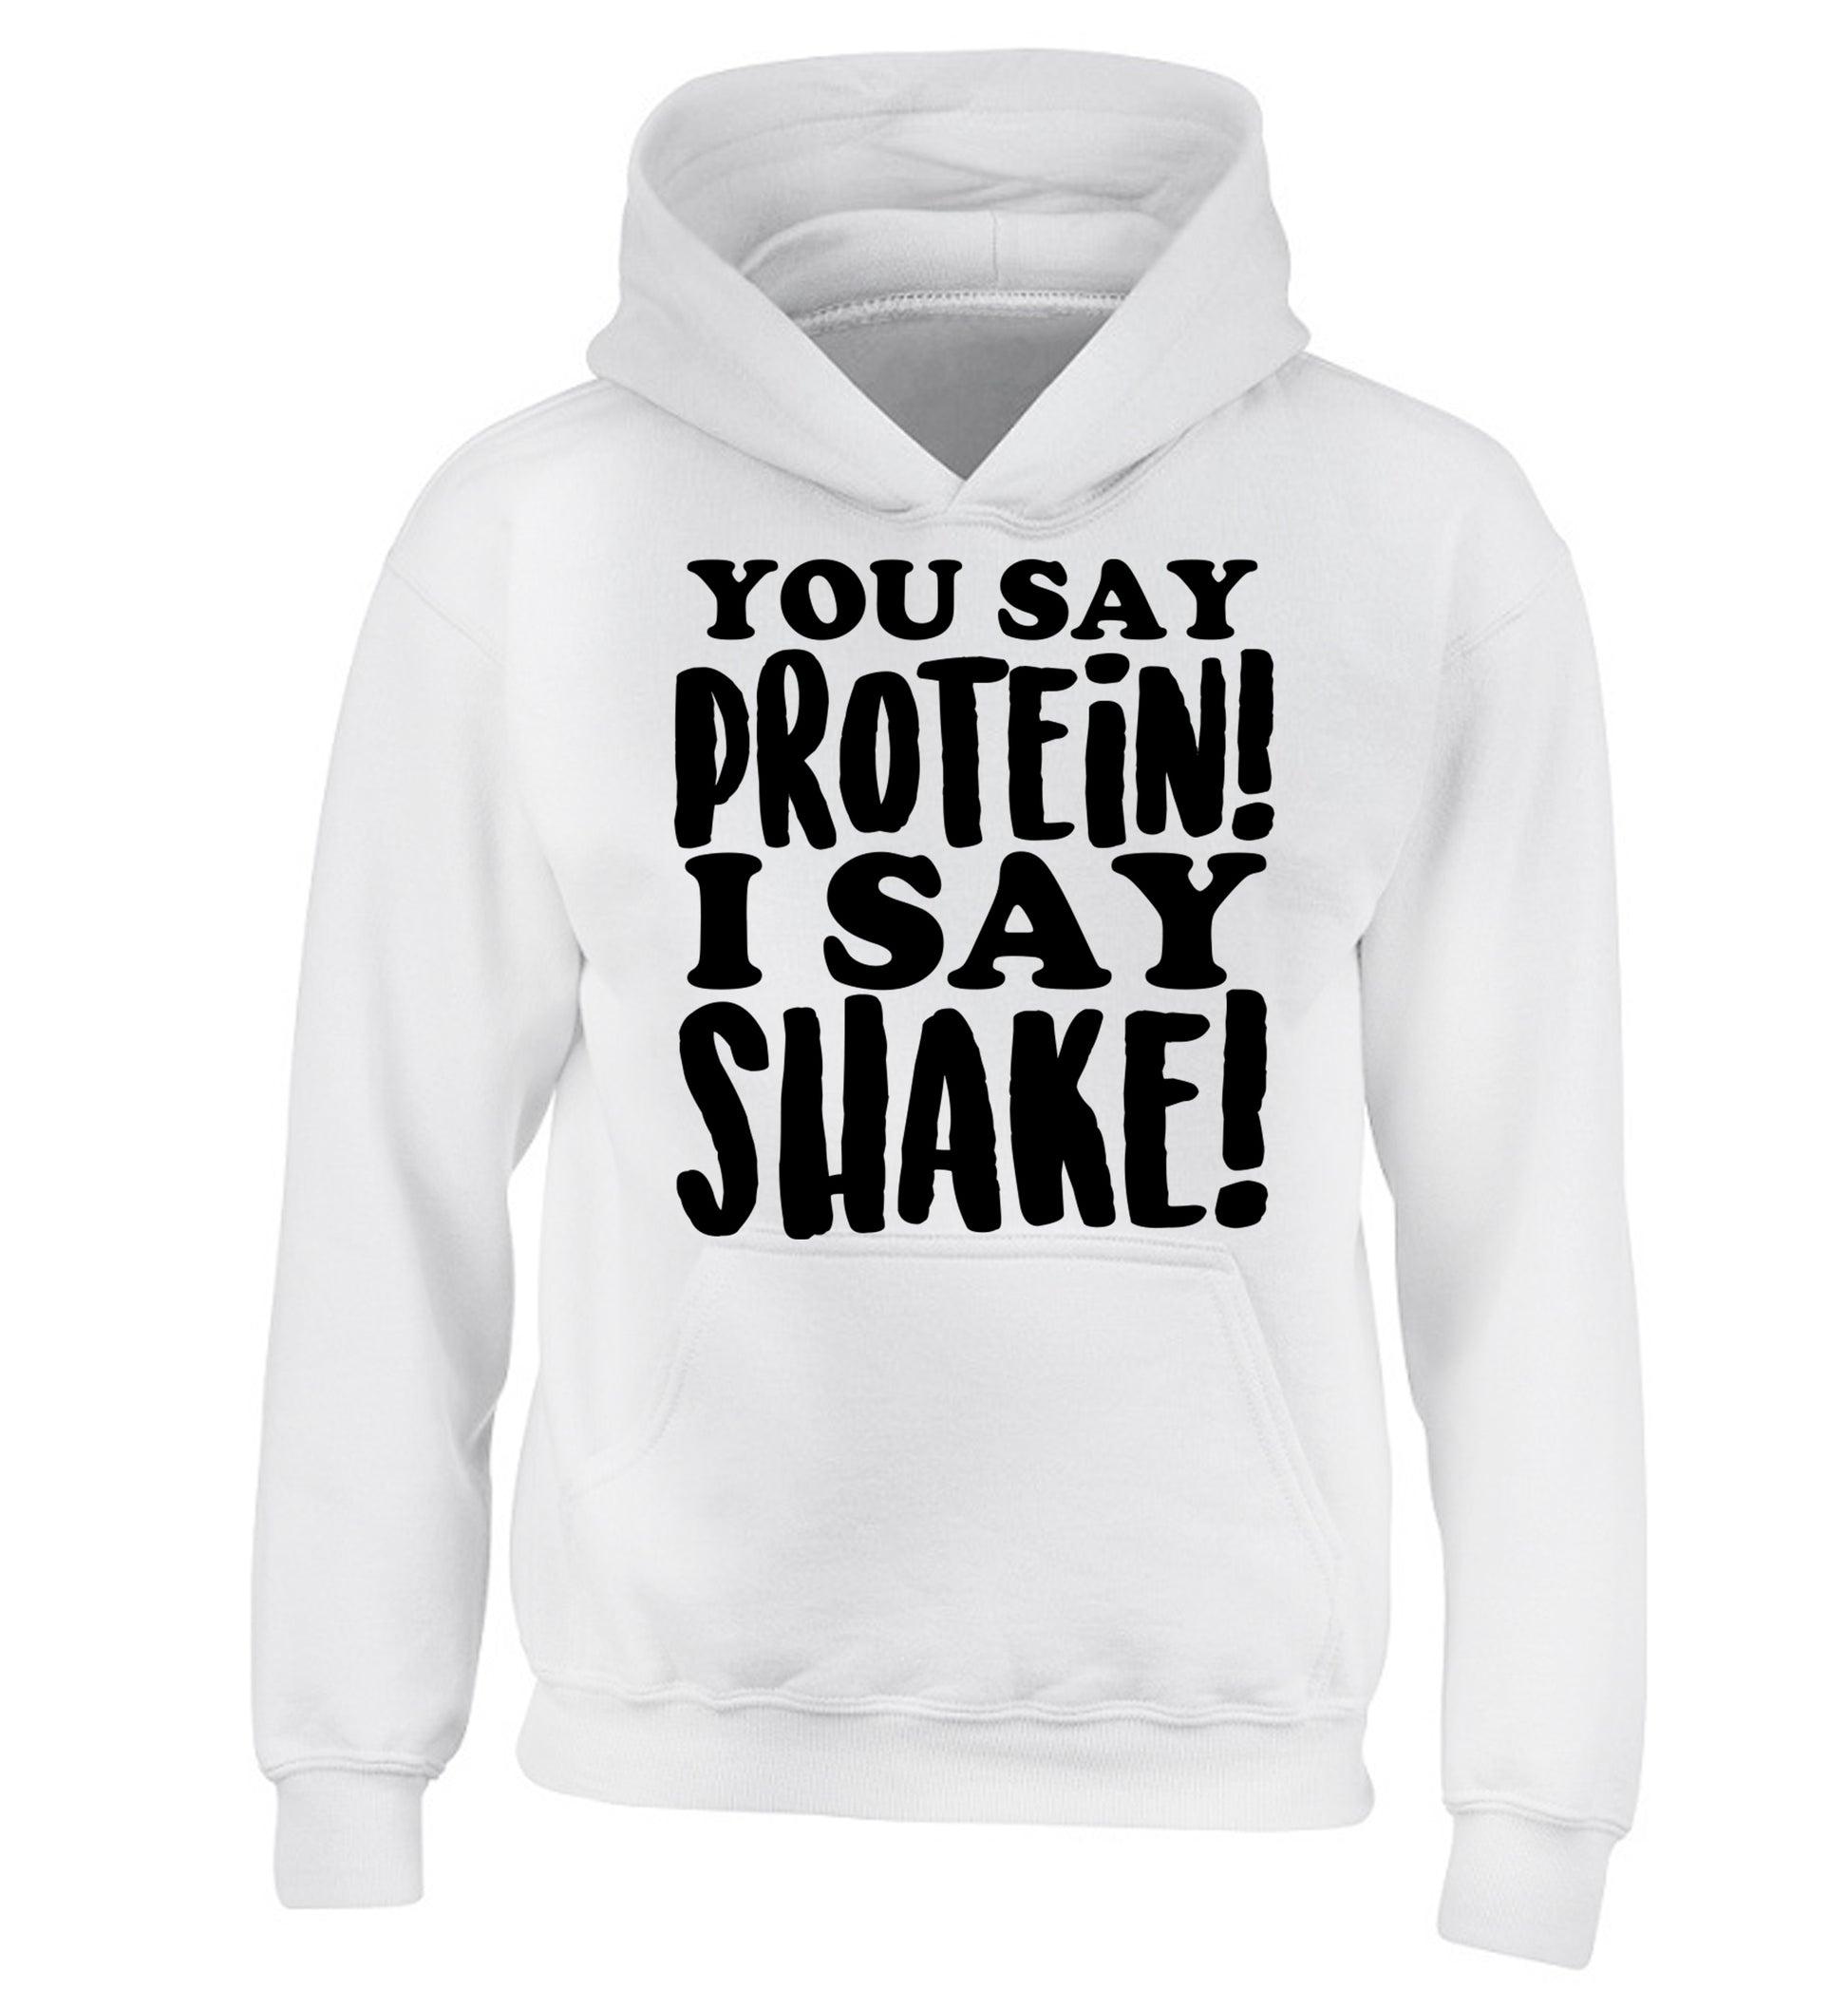 You say protein I say shake! children's white hoodie 12-14 Years